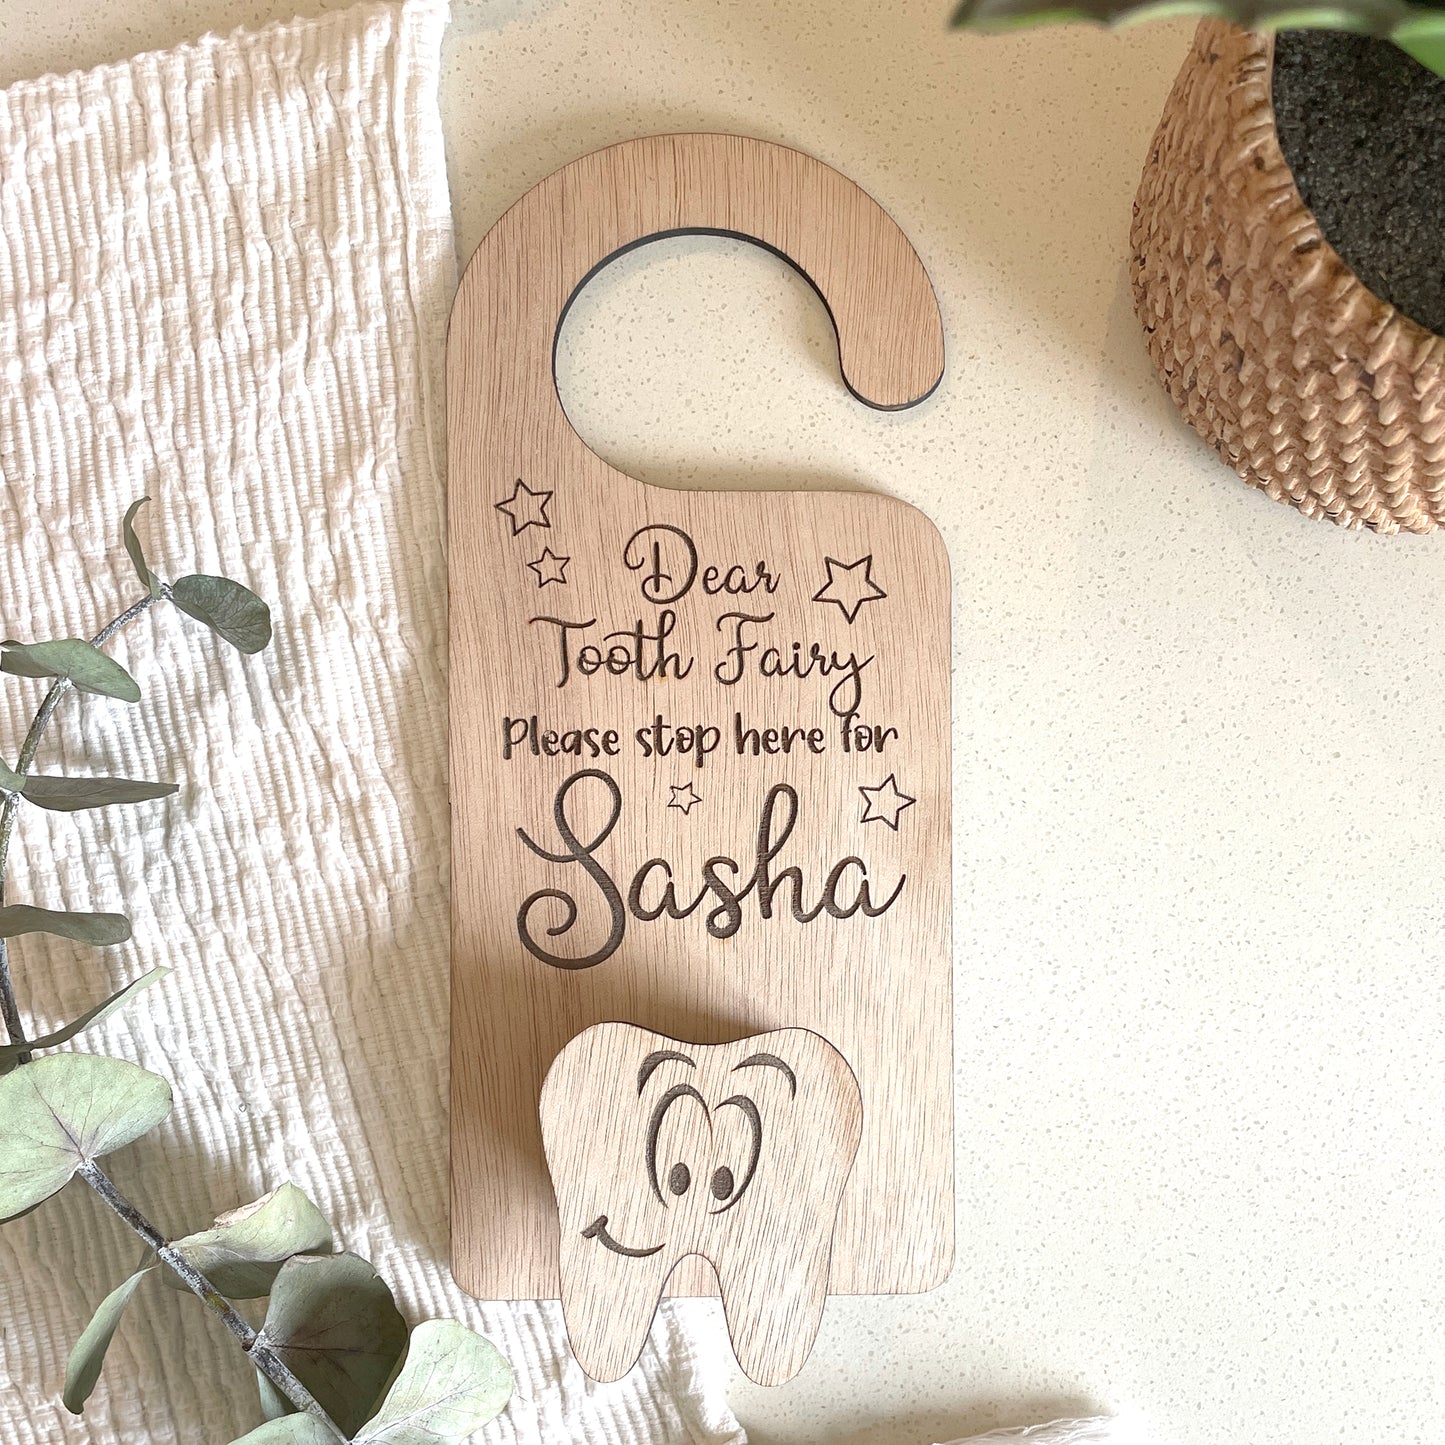 Personalised Tooth Fairy Hanger